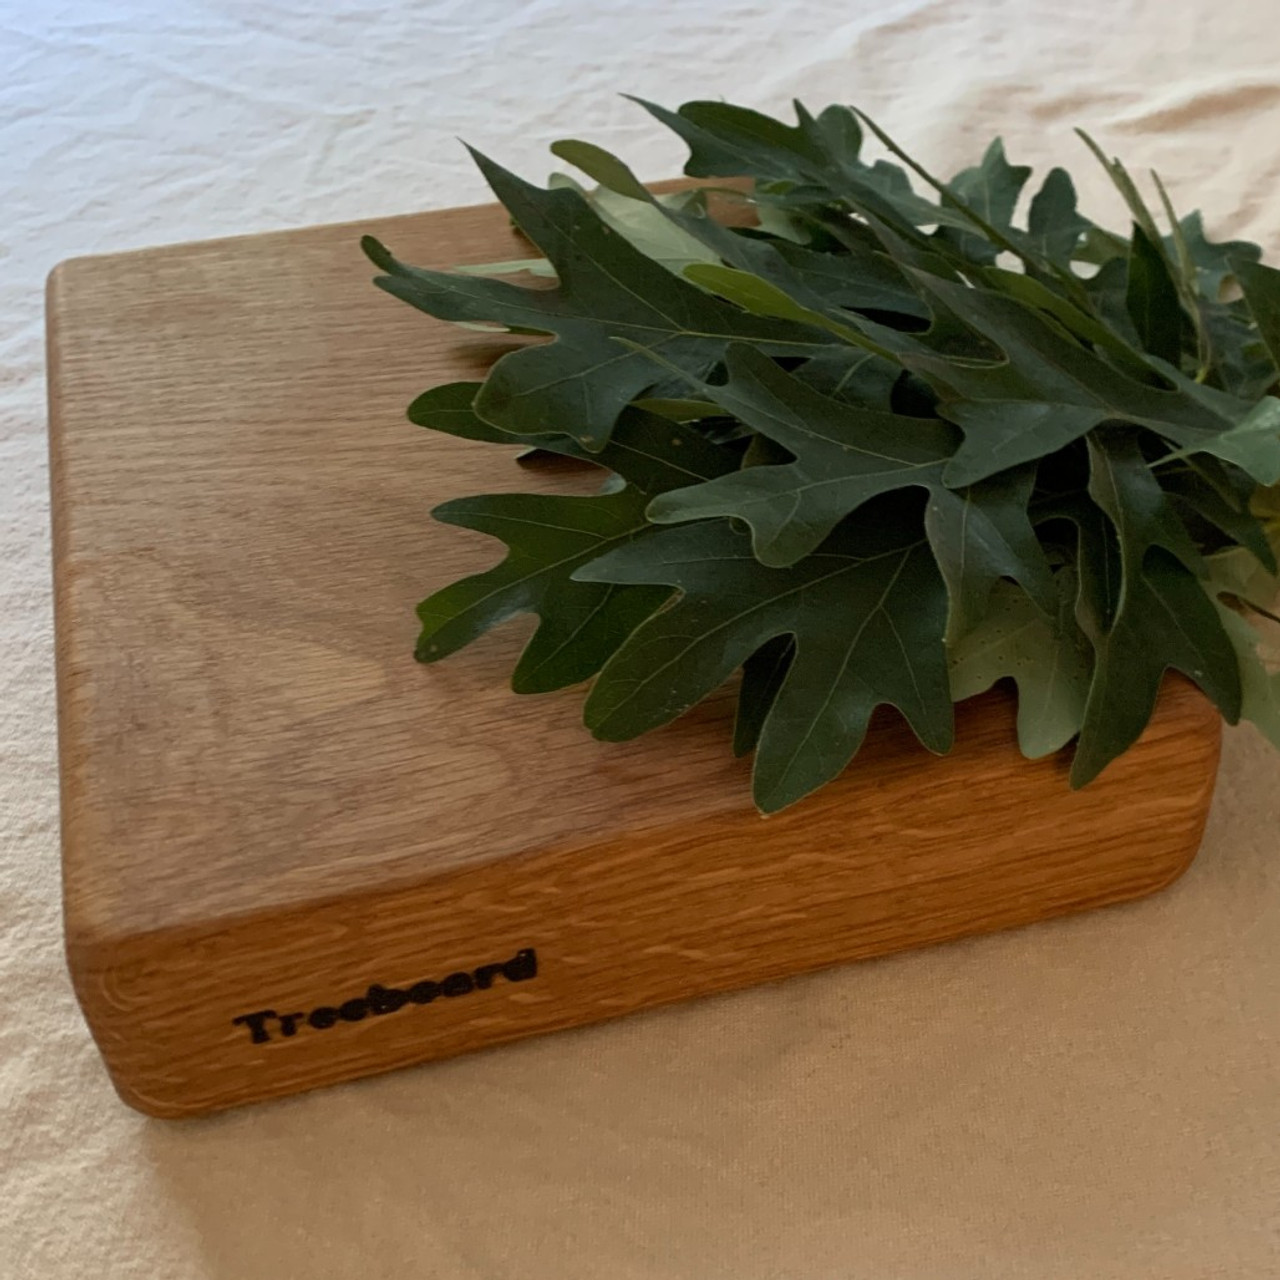 https://cdn11.bigcommerce.com/s-1vey7r6116/images/stencil/1280x1280/products/130/473/small-white-oak-cutting-board-by-Treeboard-leaves__68069.1669344772.jpg?c=1